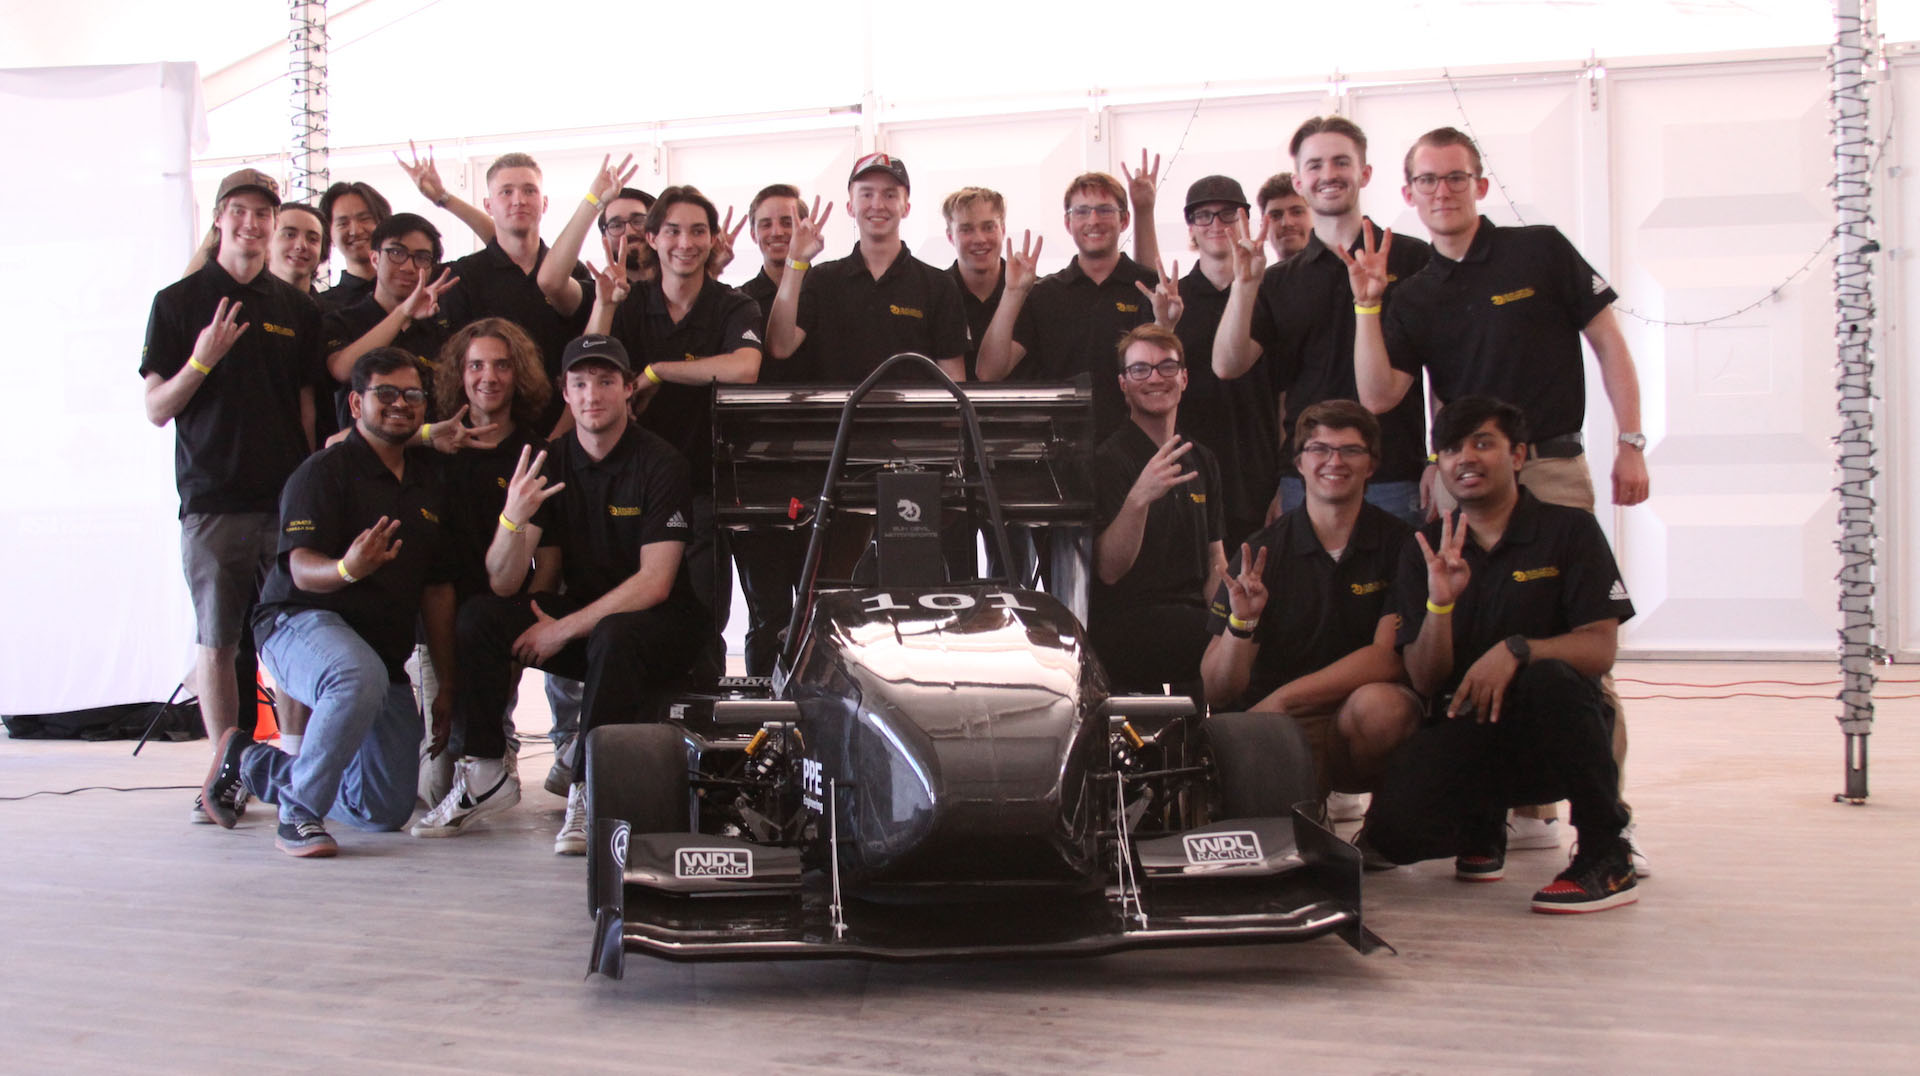 The members of the Sun Devil Motorsports team pose for a photo, displaying the ASU pitchfork school pride gesture, surrounding their latest race car, the SDM23.